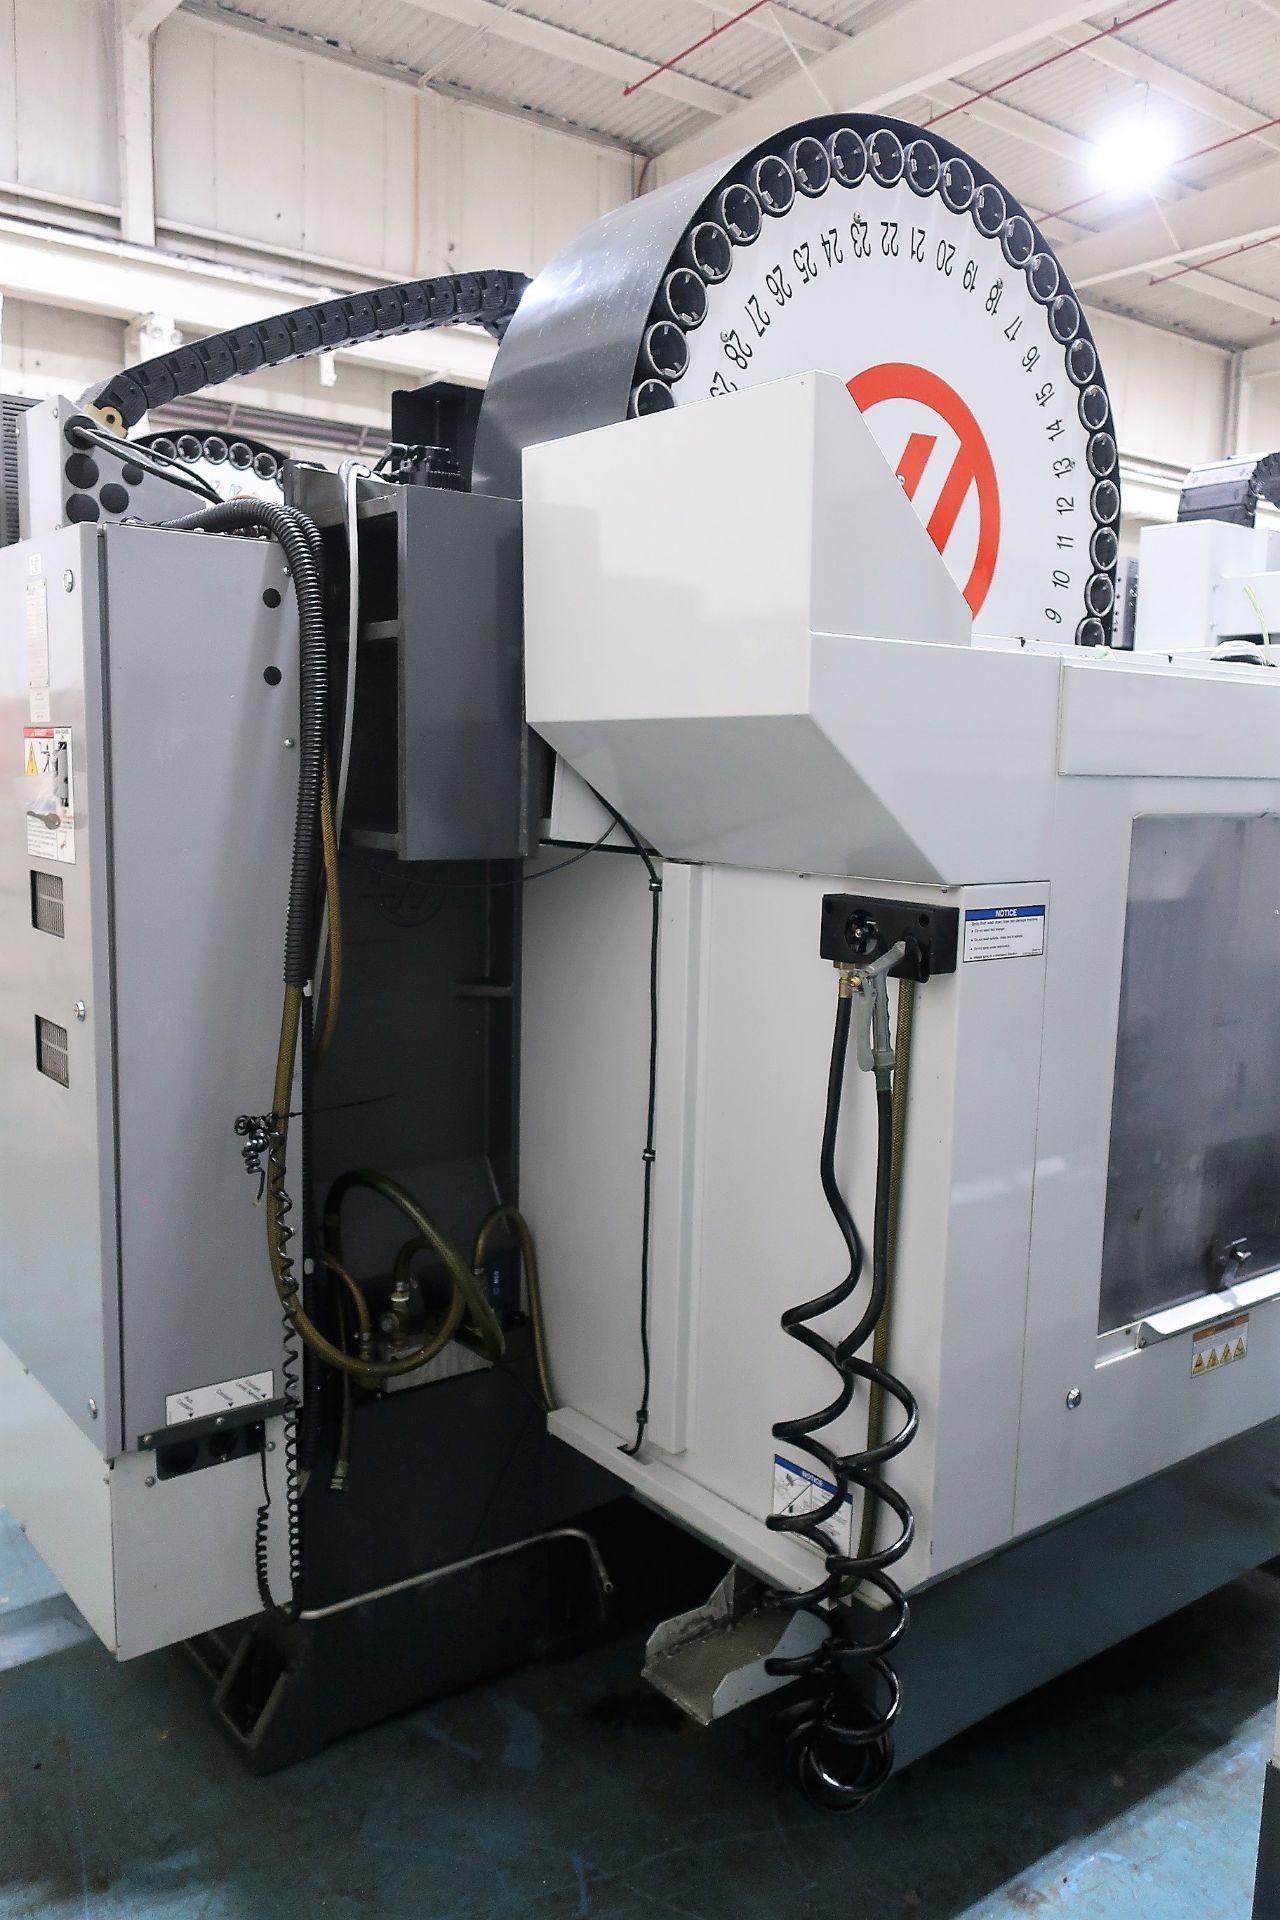 HAAS VF2-YT CNC 3-AXIS VERTICAL MACHINING CENTER, 15K RPM SPINDLE, S/N 1082158, NEW 2010 - Image 7 of 9